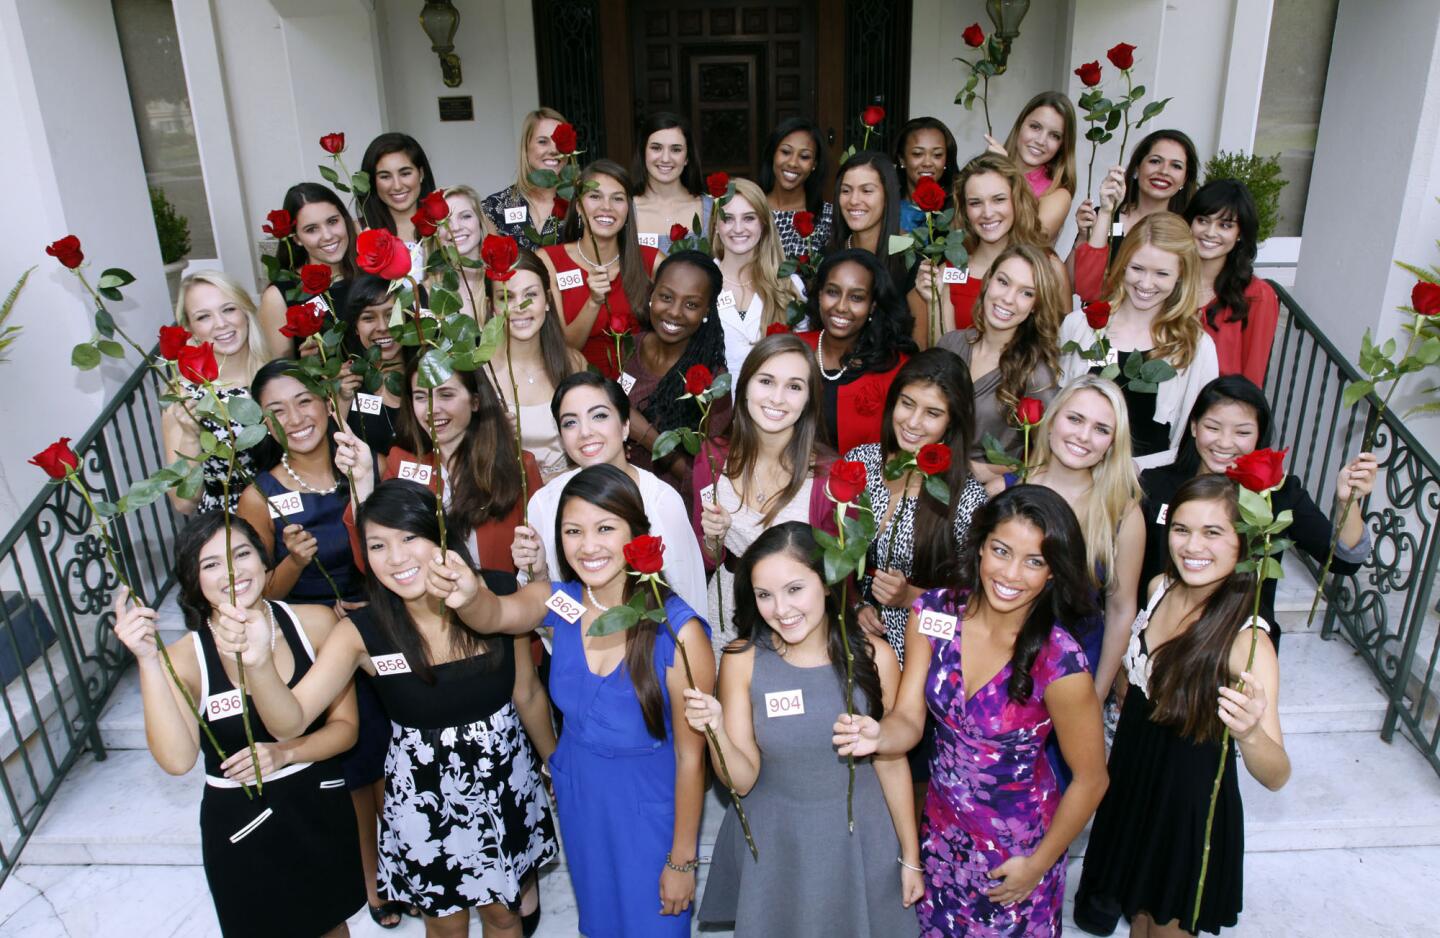 The Pasadena Tournament of Roses Royal Court finalists pose for a photo in front of the Tournament House in Pasadena on Thursday, October 6, 2011.